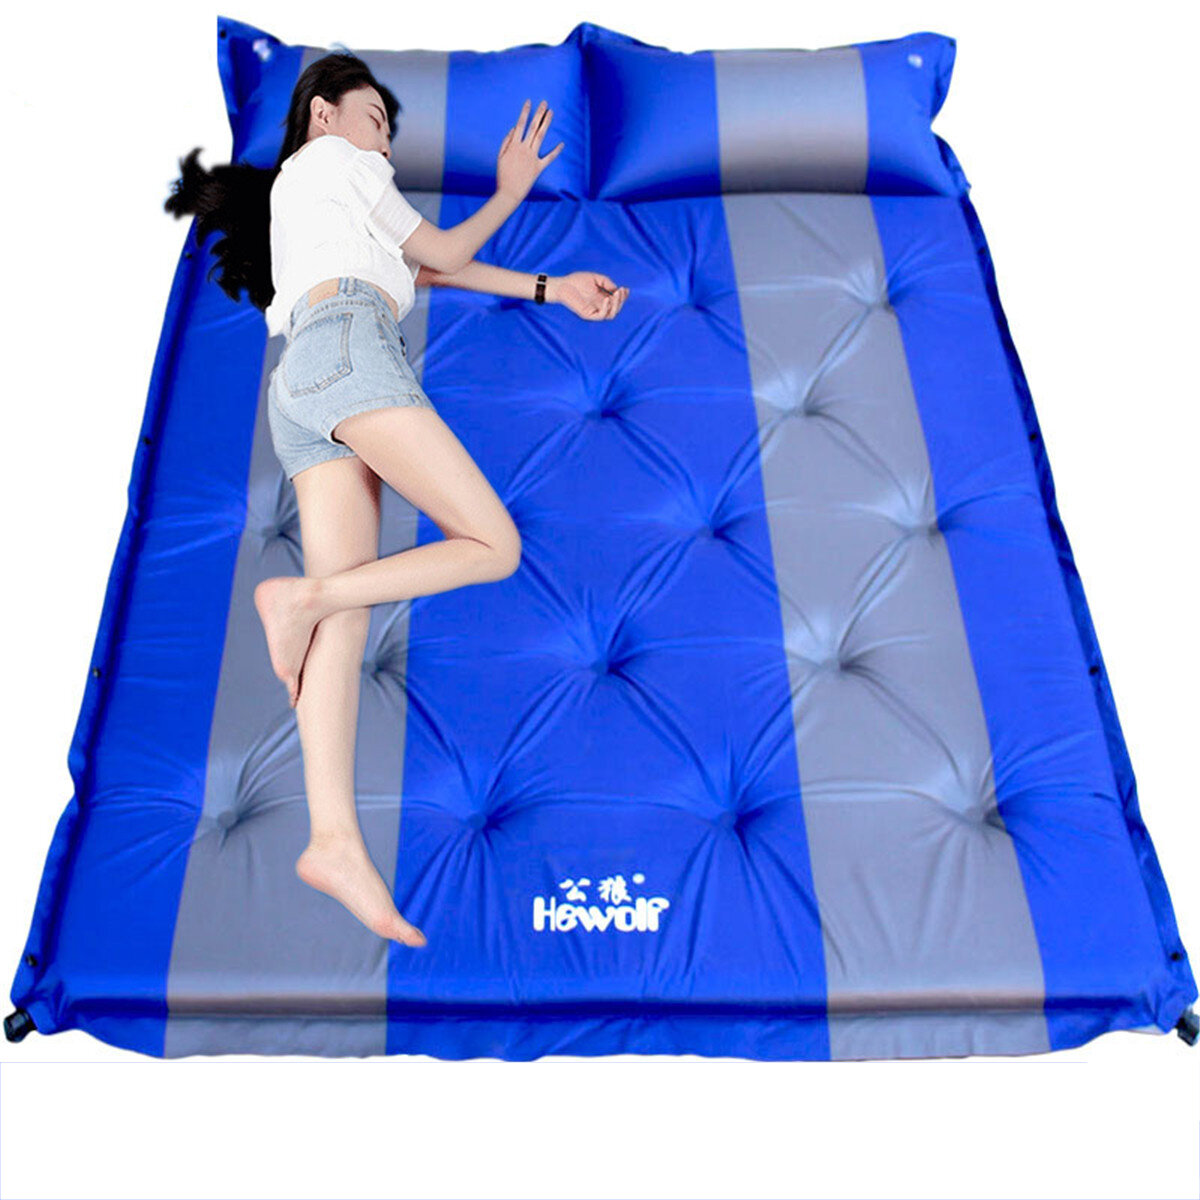 Automatic Inflatable Air Mattresses 2 People Outdoor Mat Camping Hiking Sleeping Cushion Tent